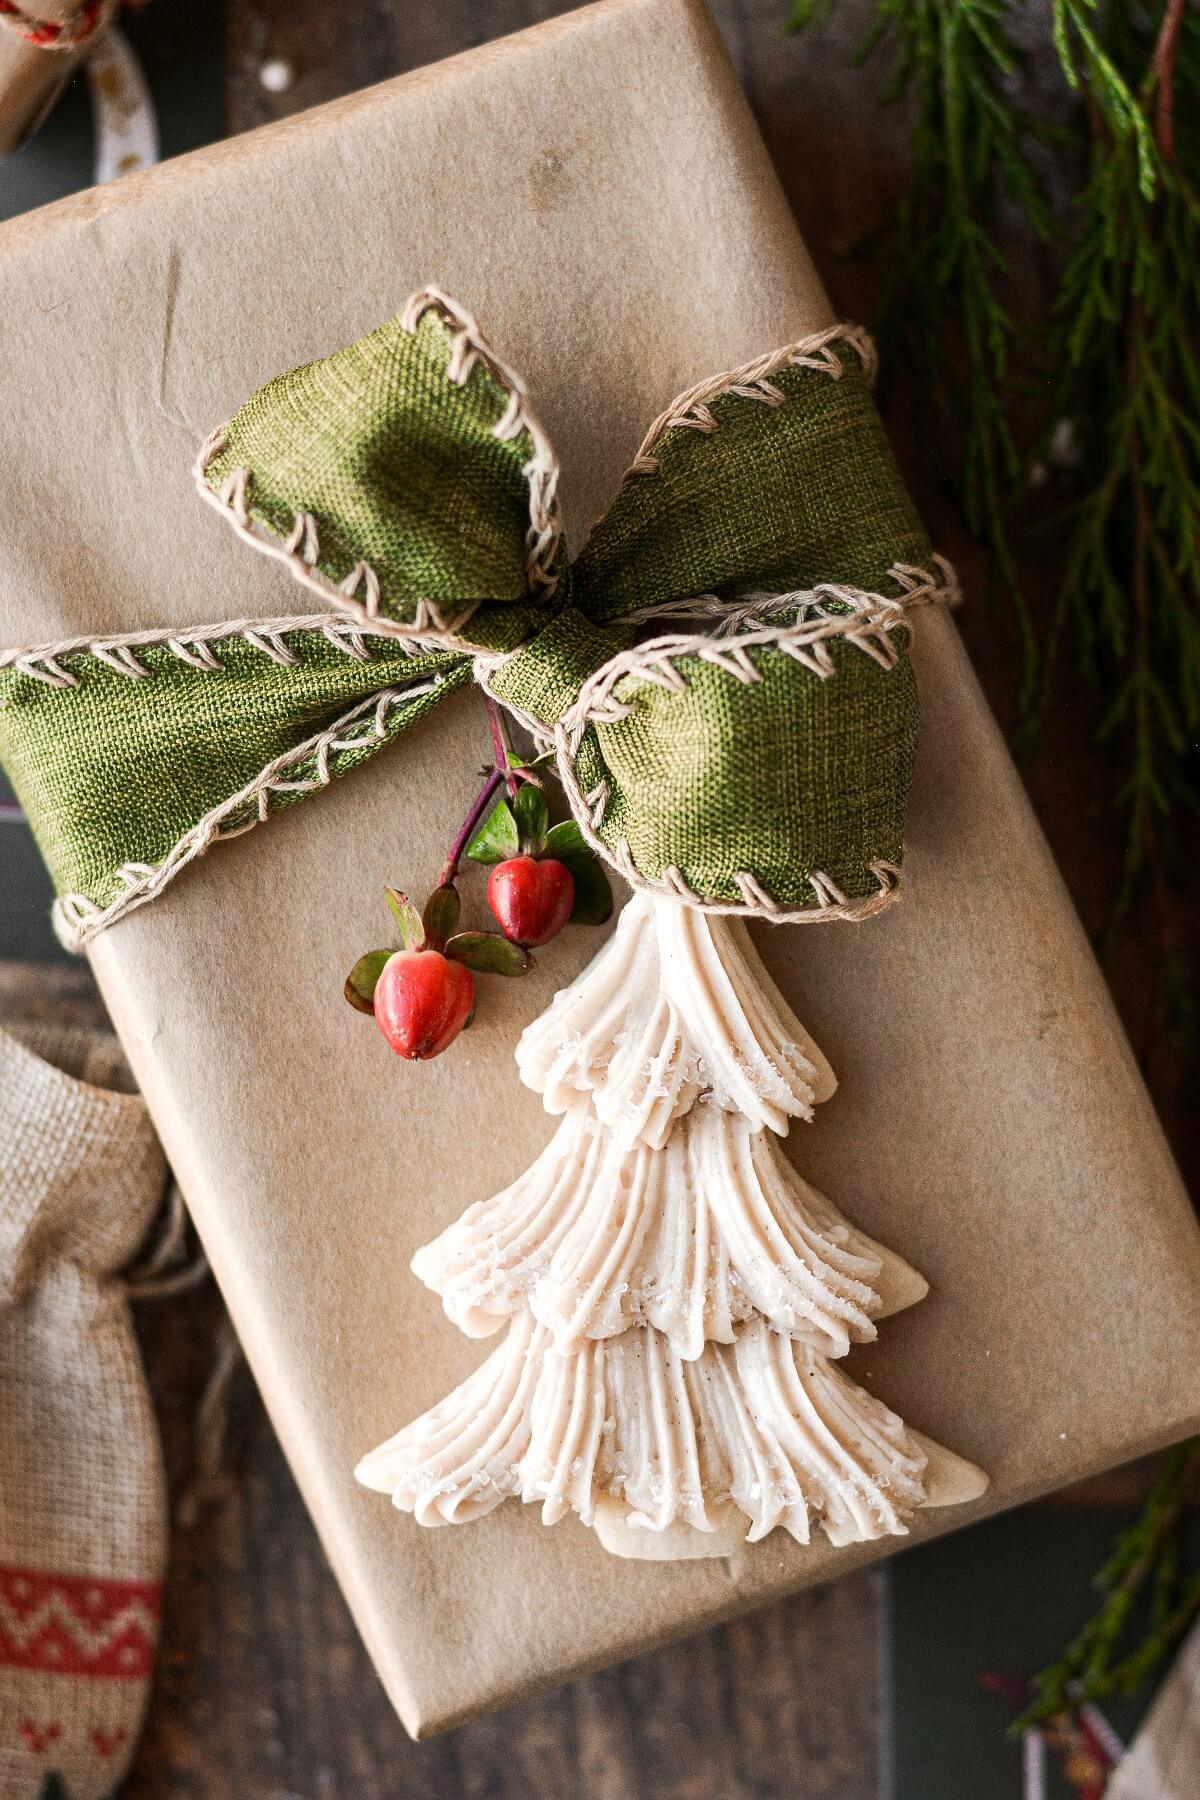 A Christmas tree cookie sitting on a present tied with green ribbon.